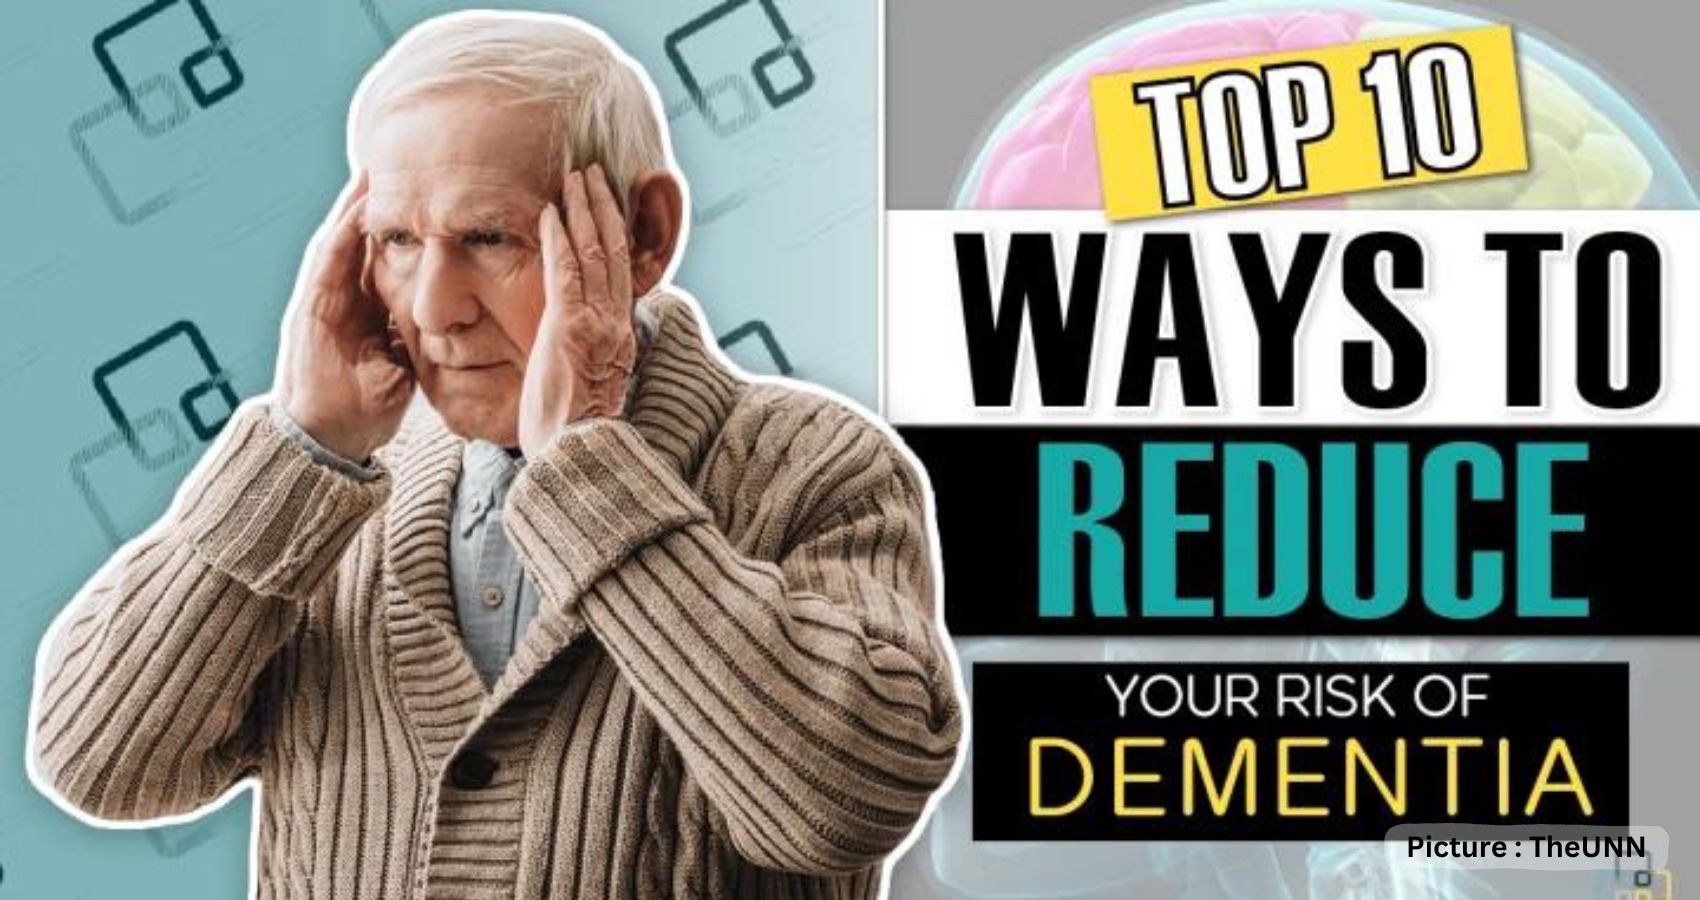 10 Ways To Reduce Your Risk Of Dementia